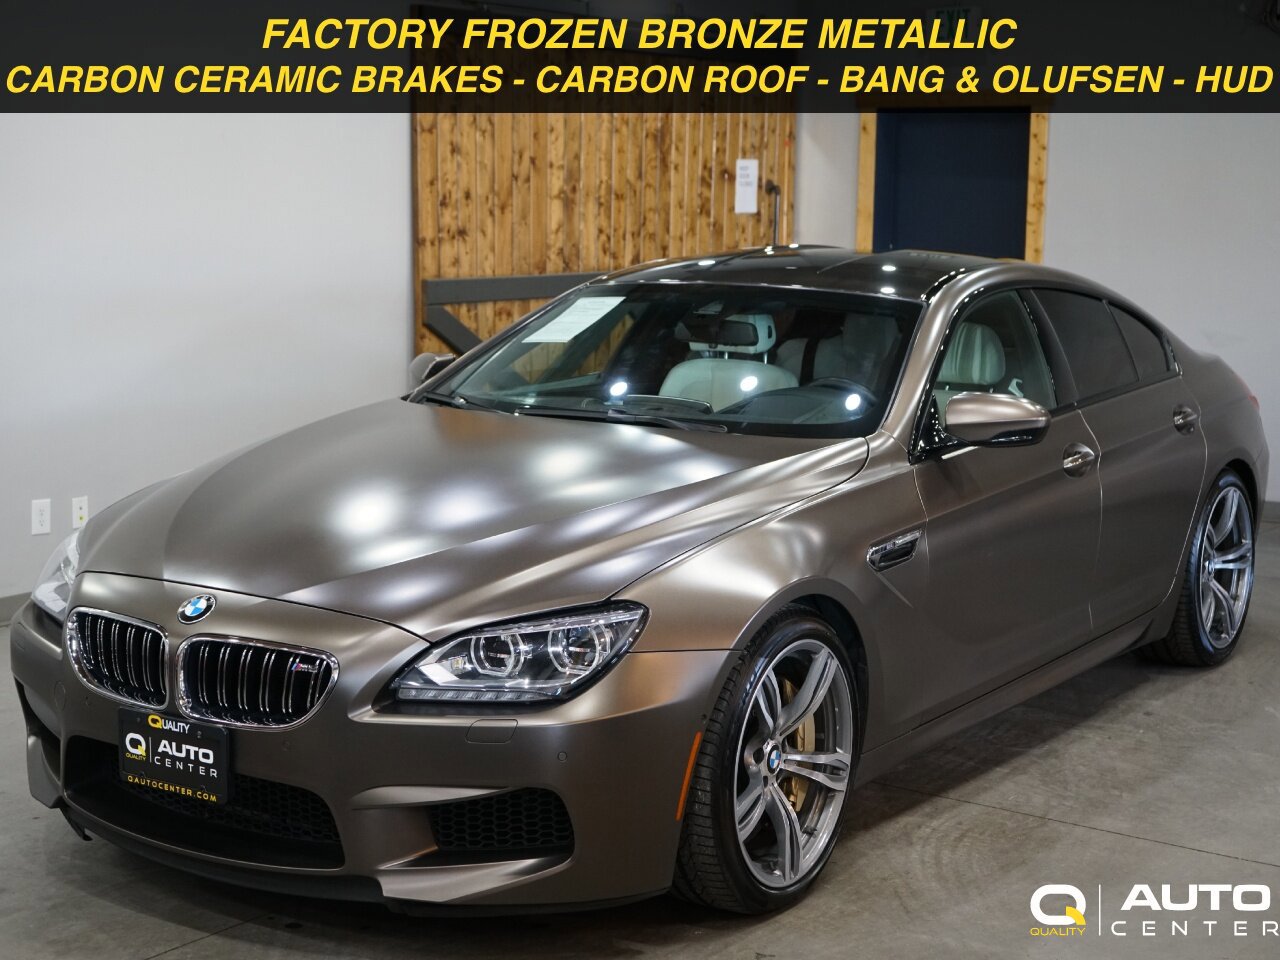 Used 2014 BMW M6 for Sale Right Now - Autotrader